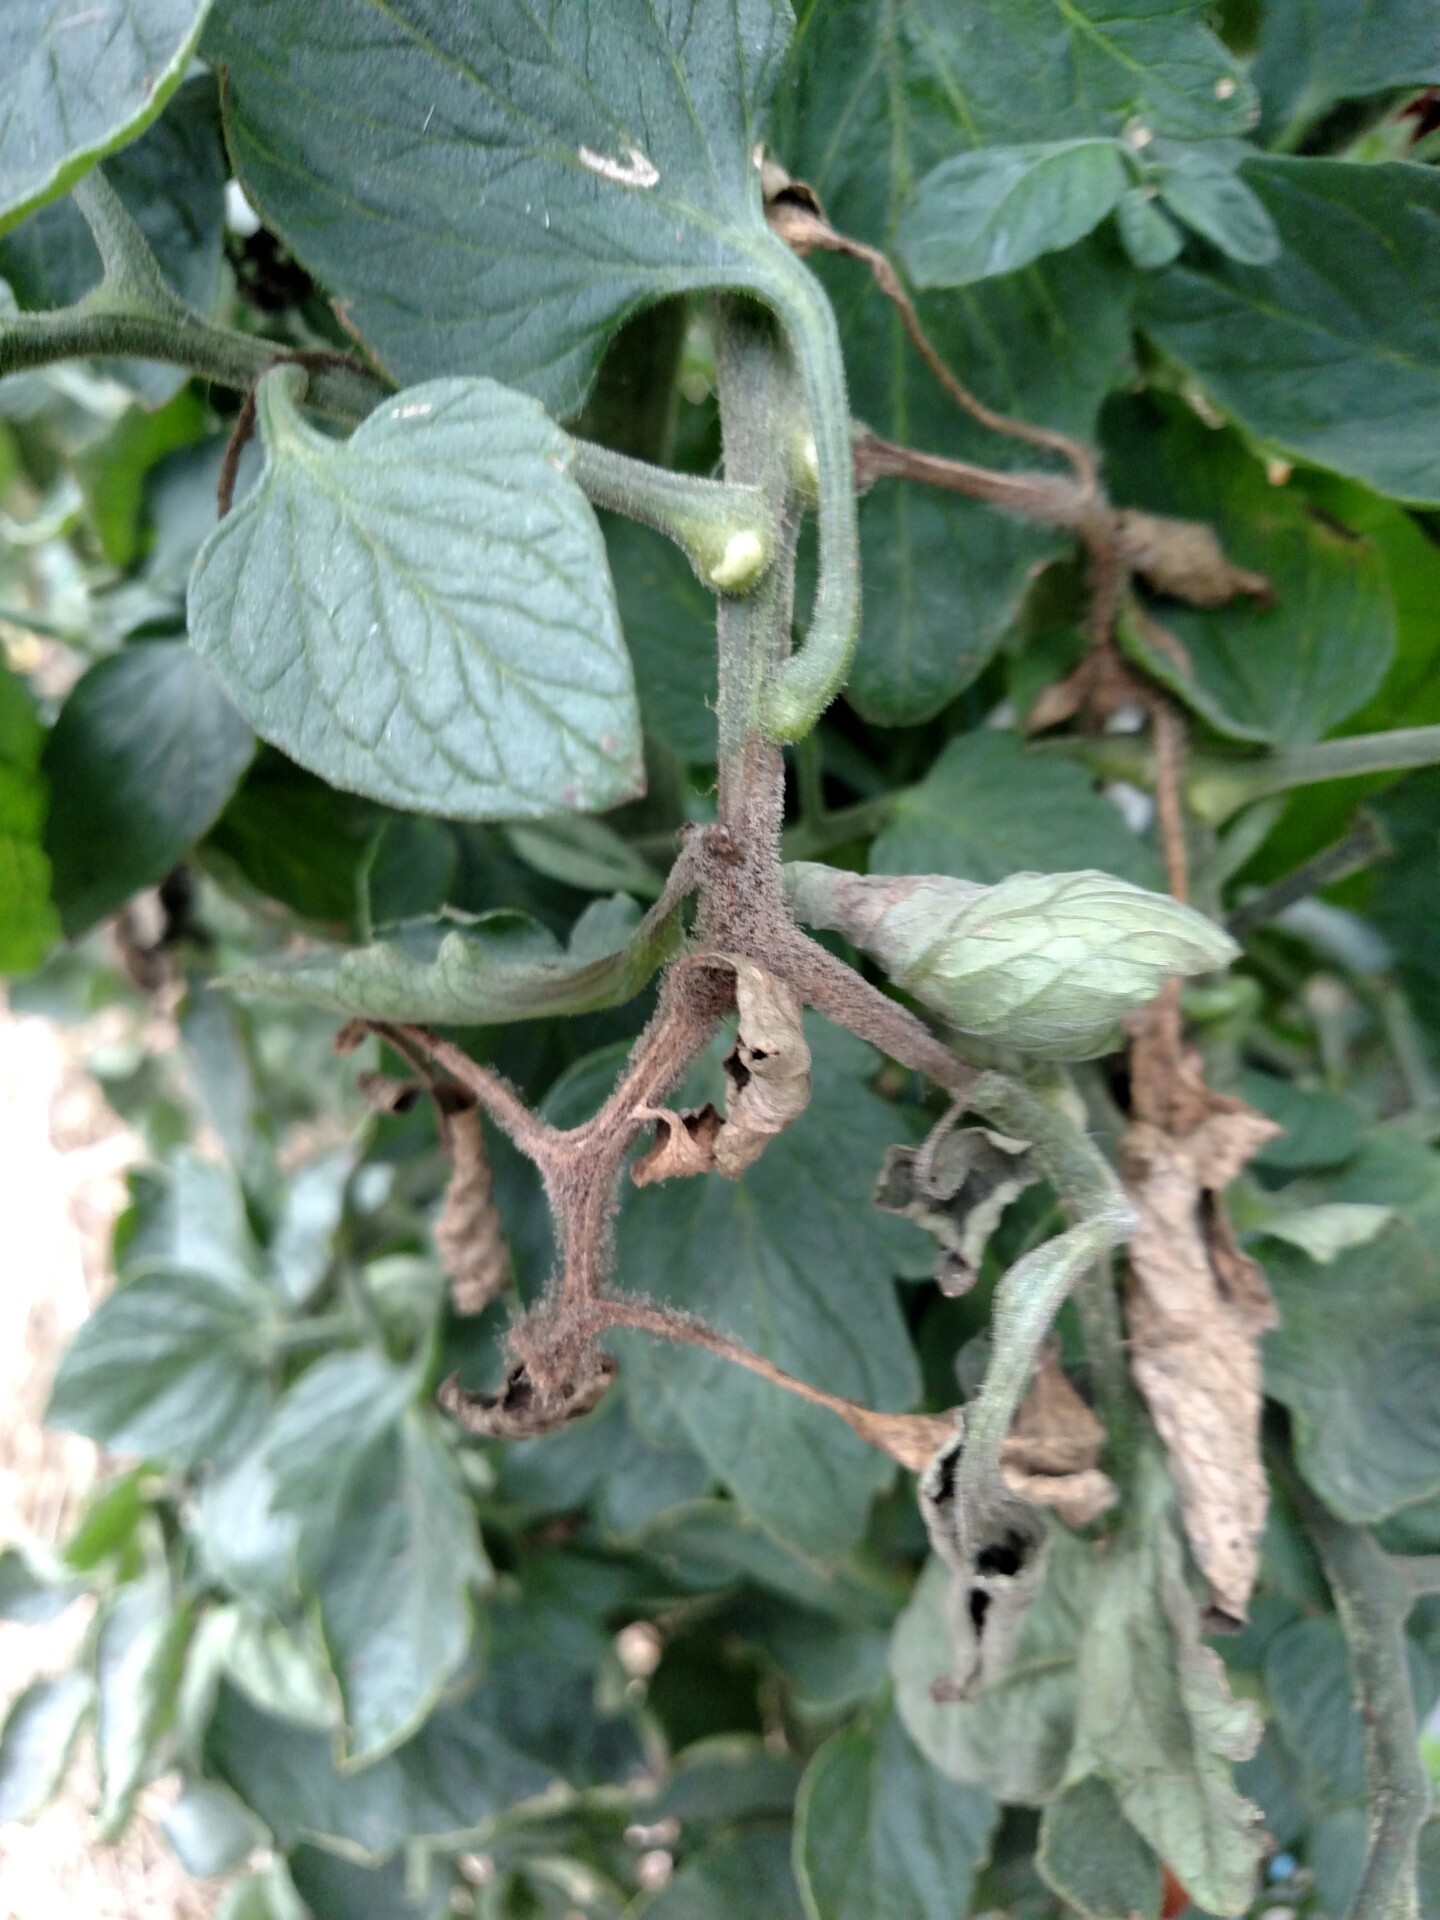 The fungus that causes gray mold often sporulates on infected tomato stems.